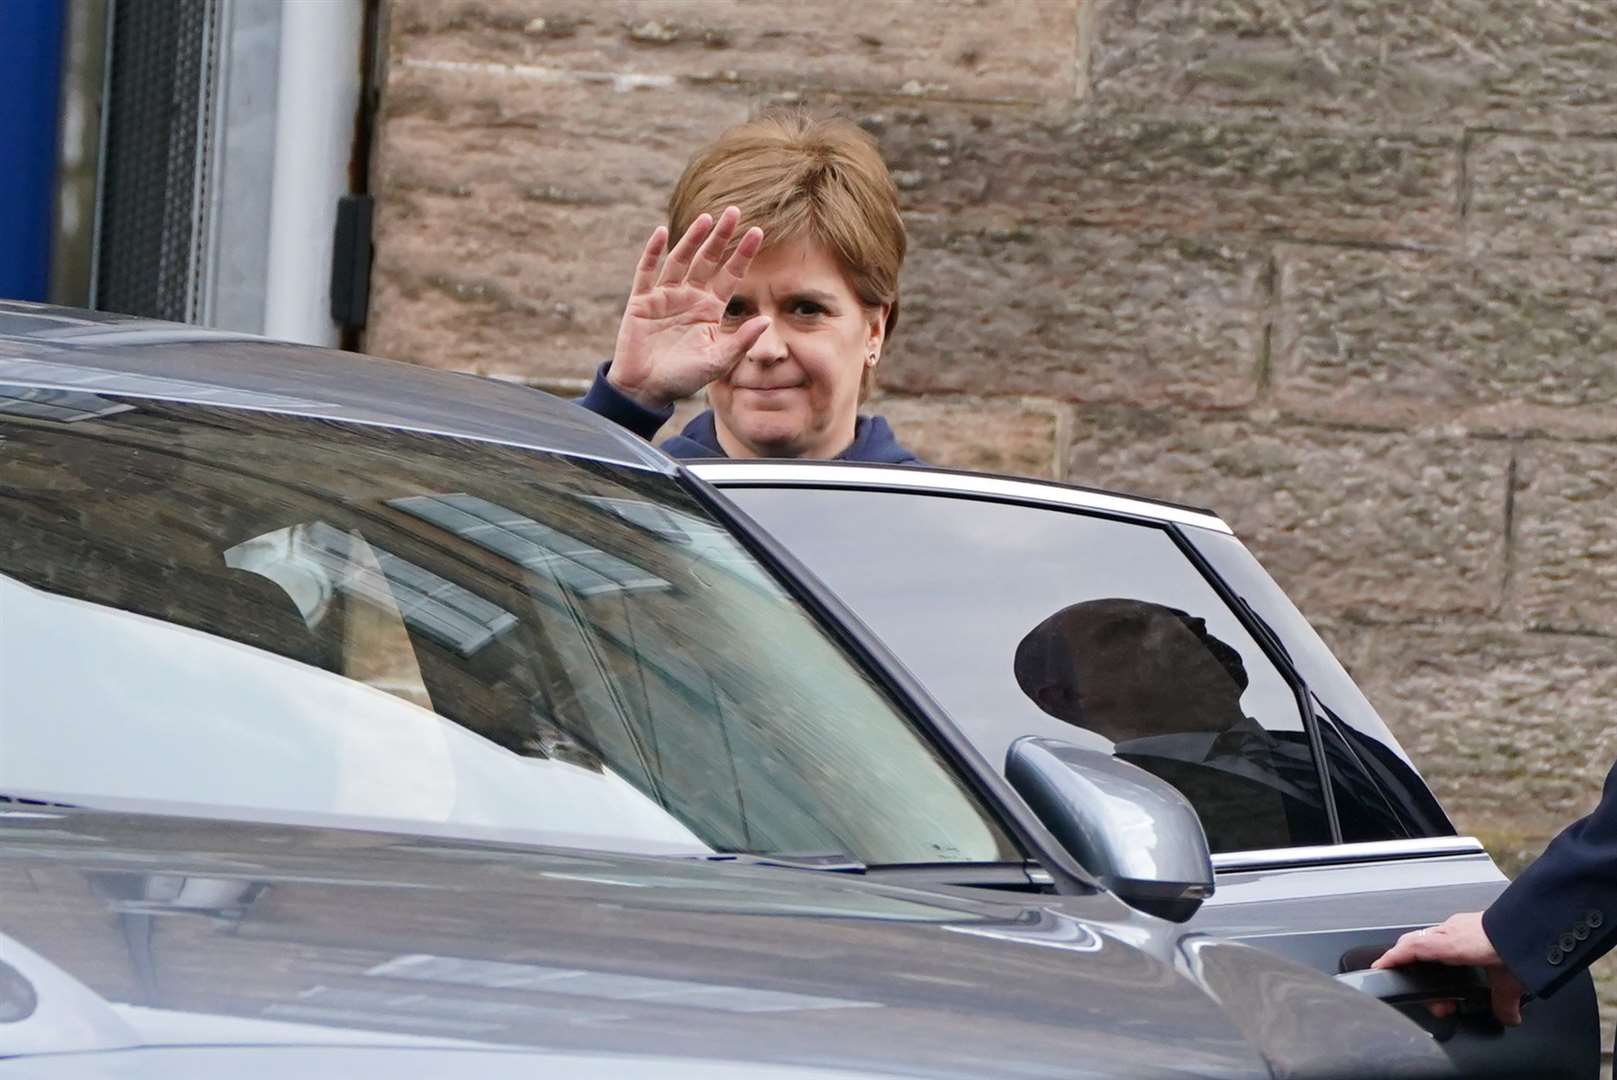 Nicola Sturgeon announced last month she was quitting as both SNP leader and Scottish First Minister – with her successor due to be announced next week (Andrew Milligan/PA)